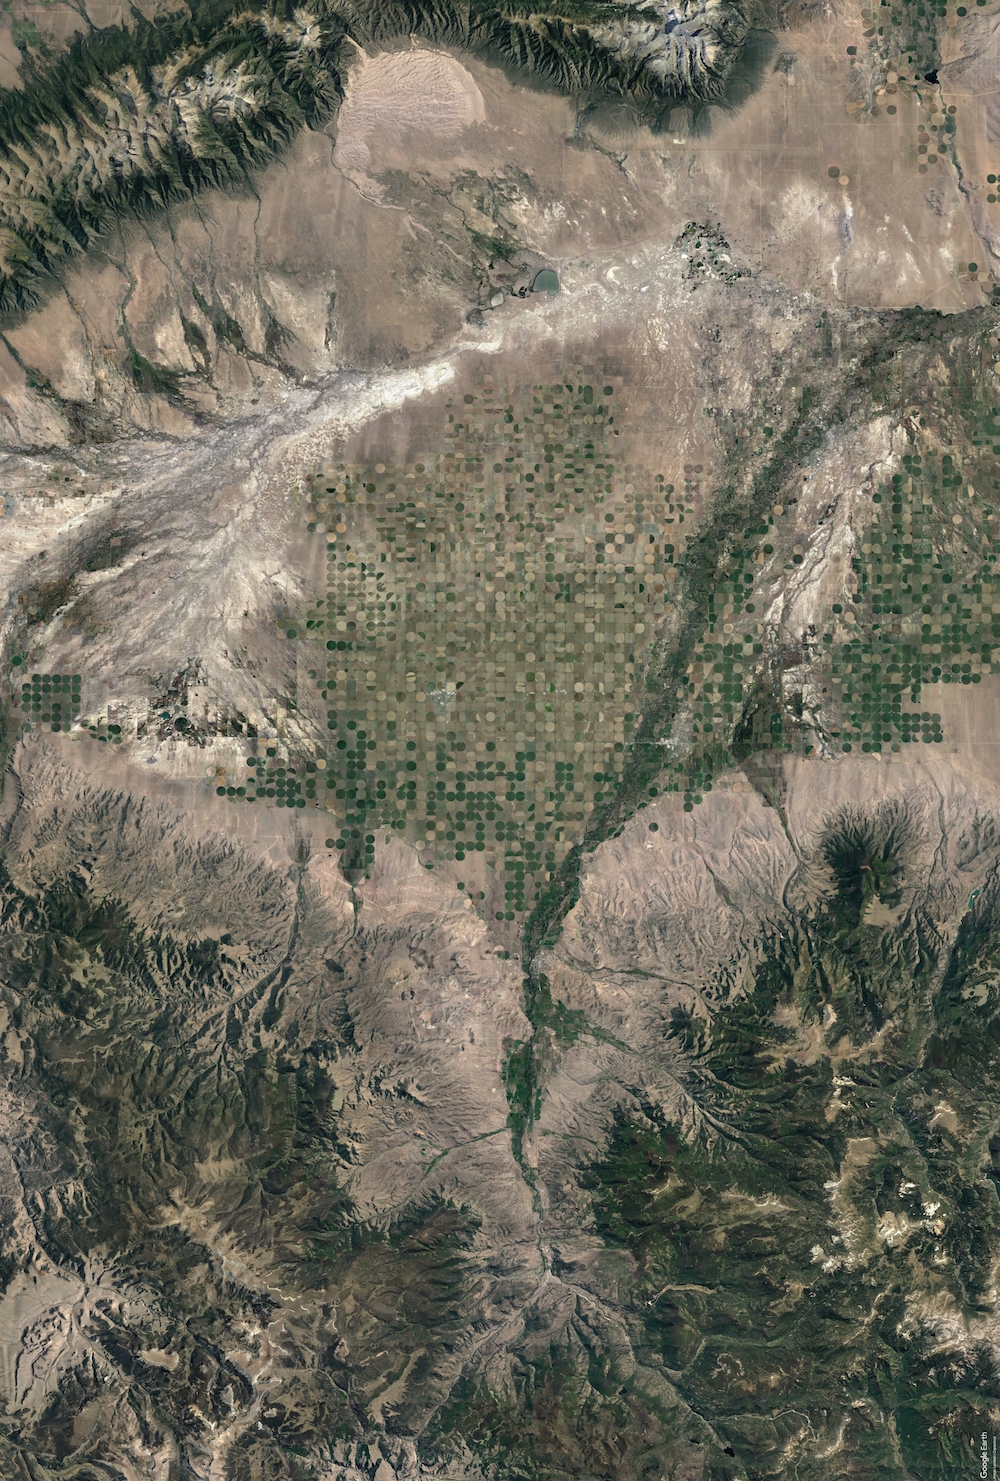 Satellite image of the San Luis Valley, Colorado, exported from Google Earth Pro
Year: 2022
Image Credit: Google Earth Pro?
Courtesy the artist